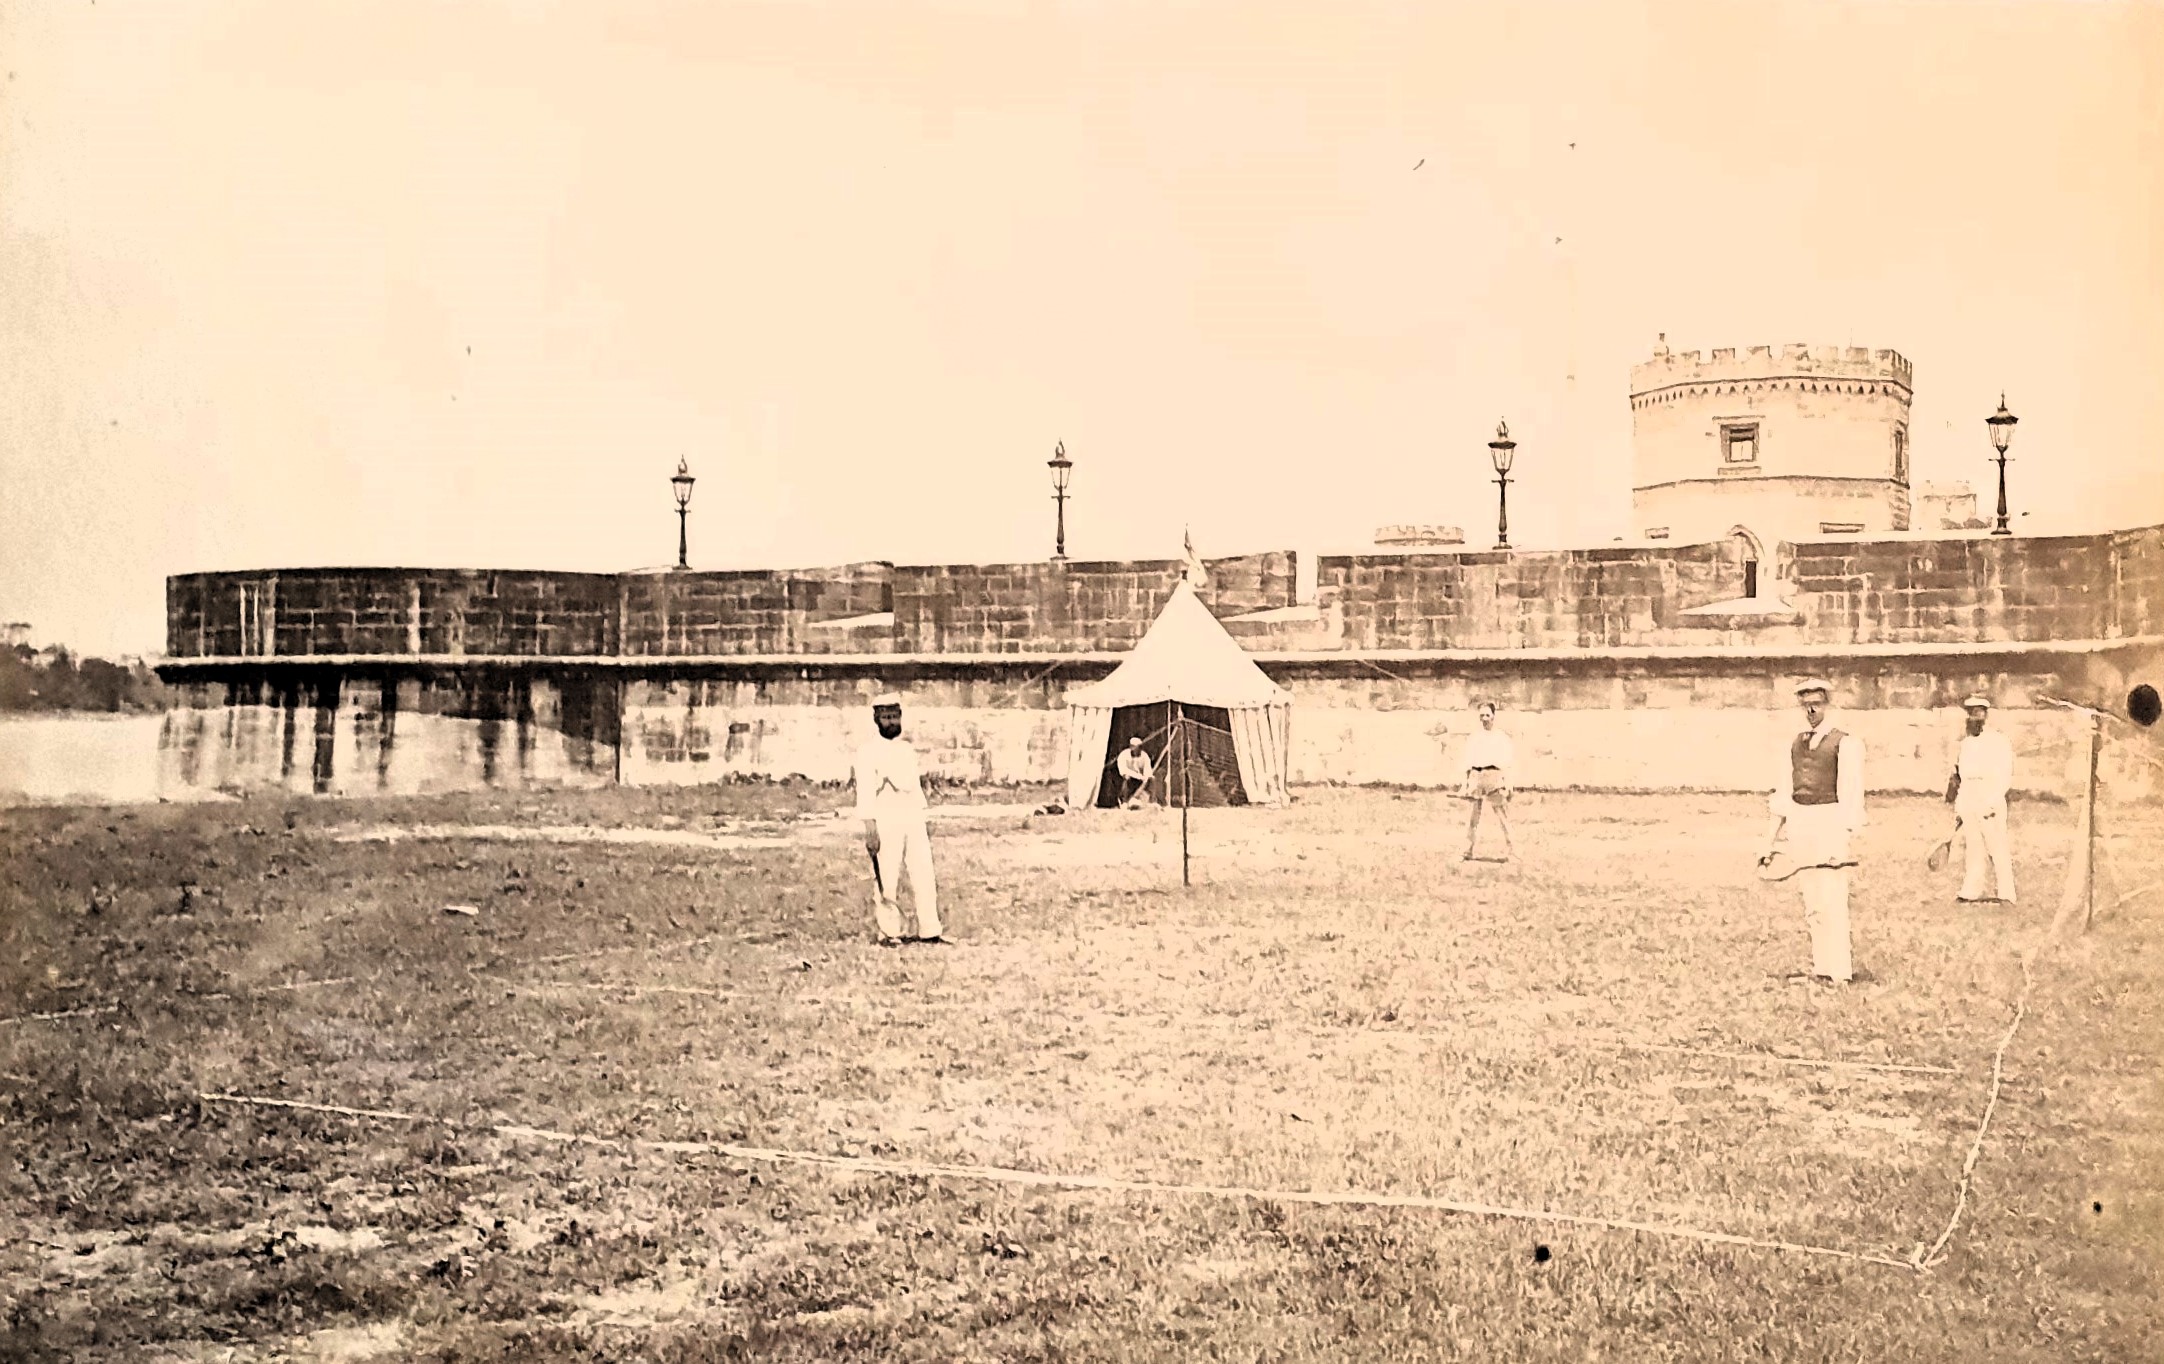 Captain Murray’s Lawn Tennis, Fort Macquarie 1878, courtesy of Mitchell Library